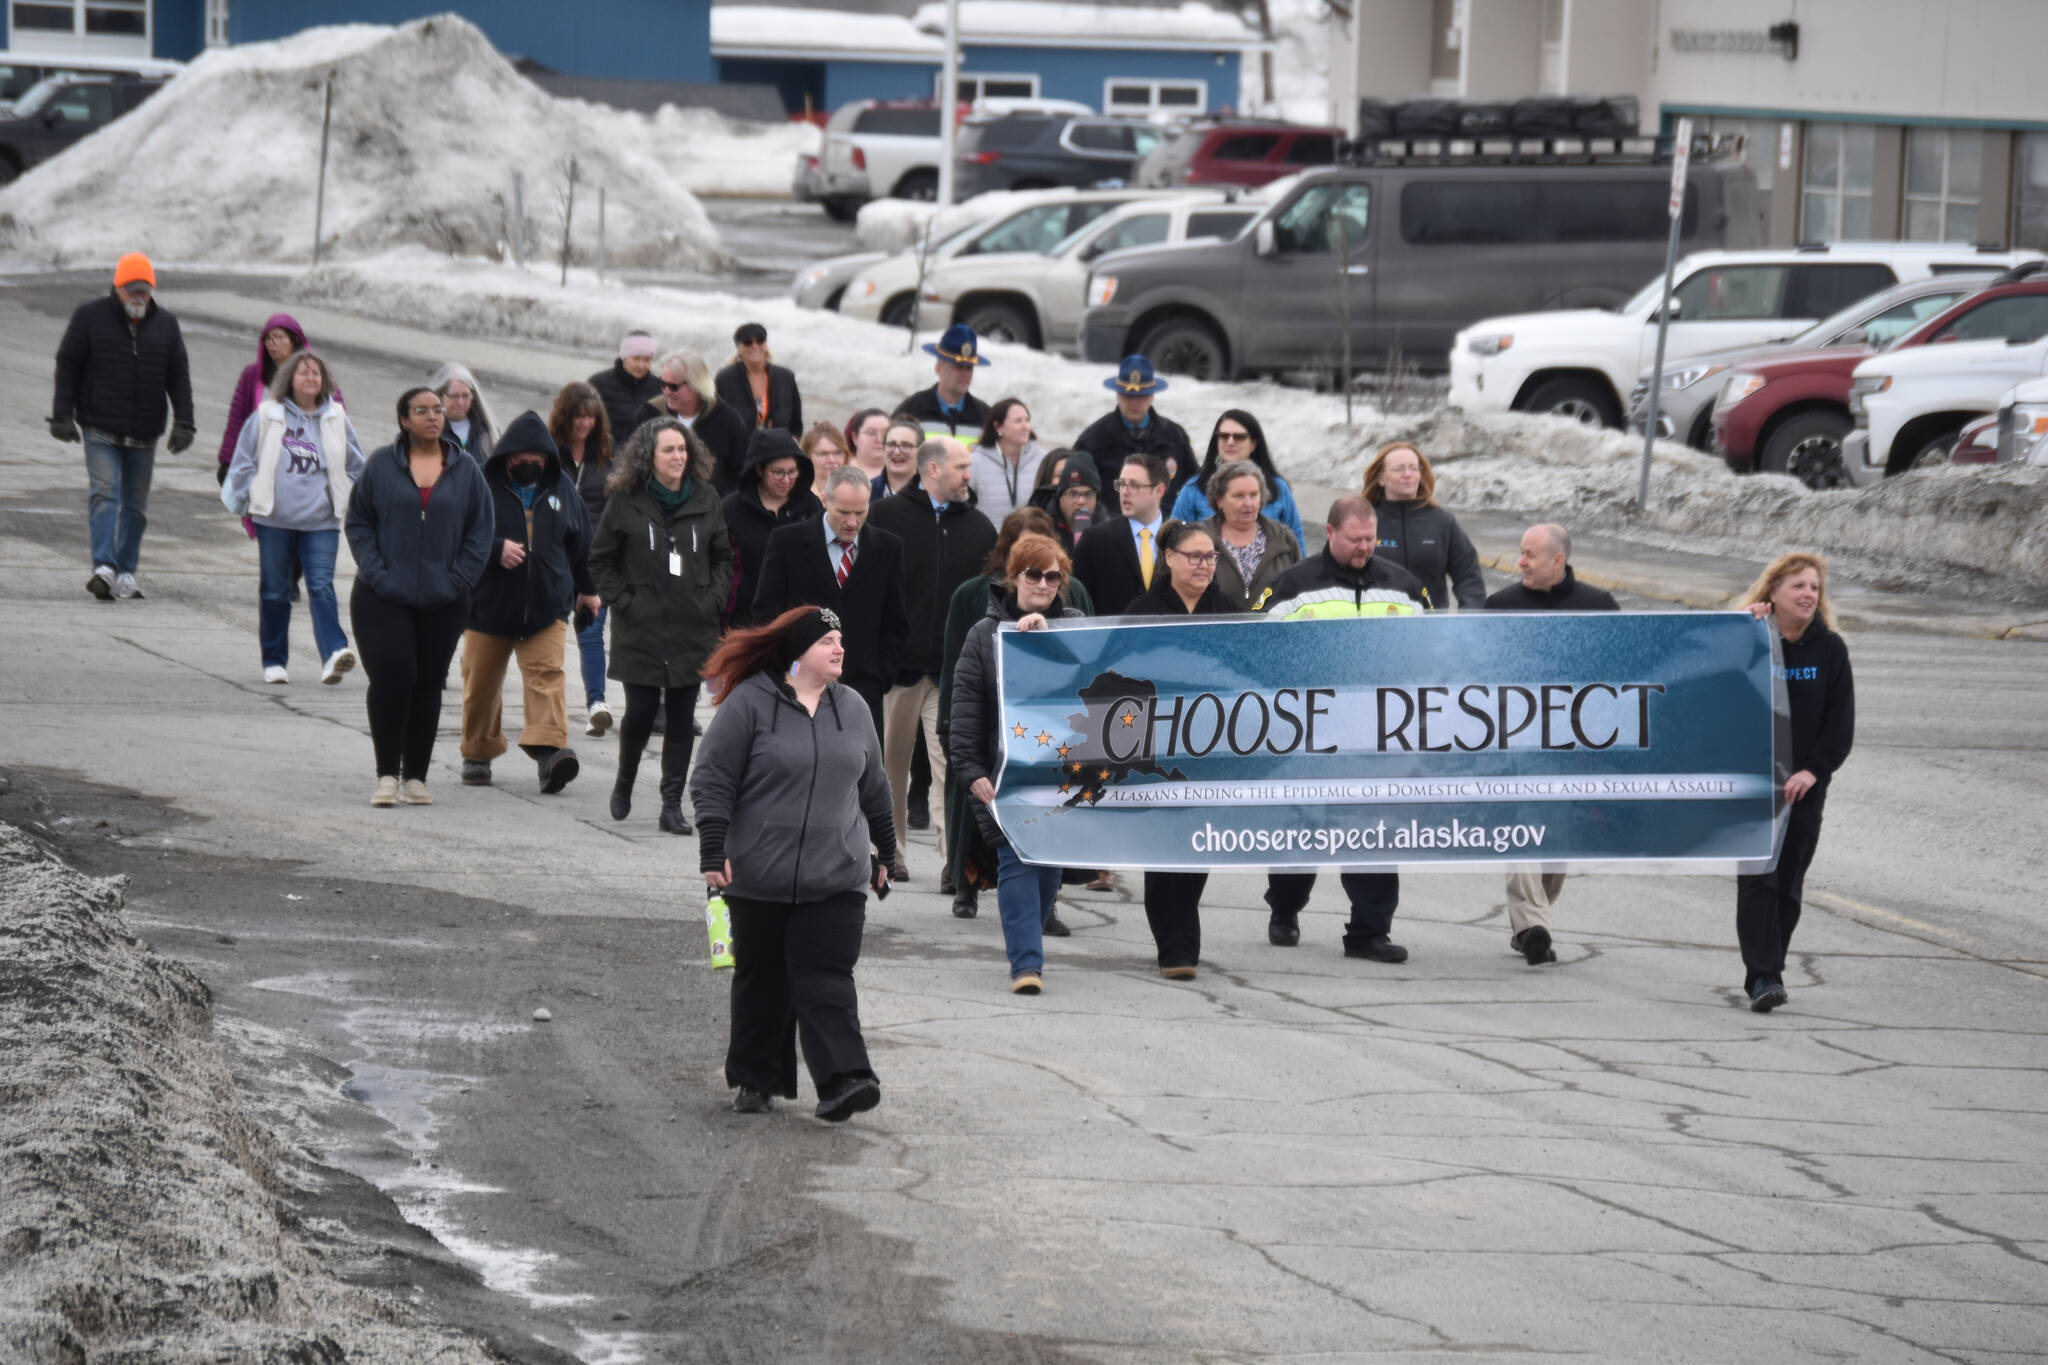 The 11th Annual Alaskans Choose Respect Awareness Event proceeds down Frontage Road in Kenai, Alaska on Wednesday, March 29, 2023. (Jake Dye/Peninsula Clarion)